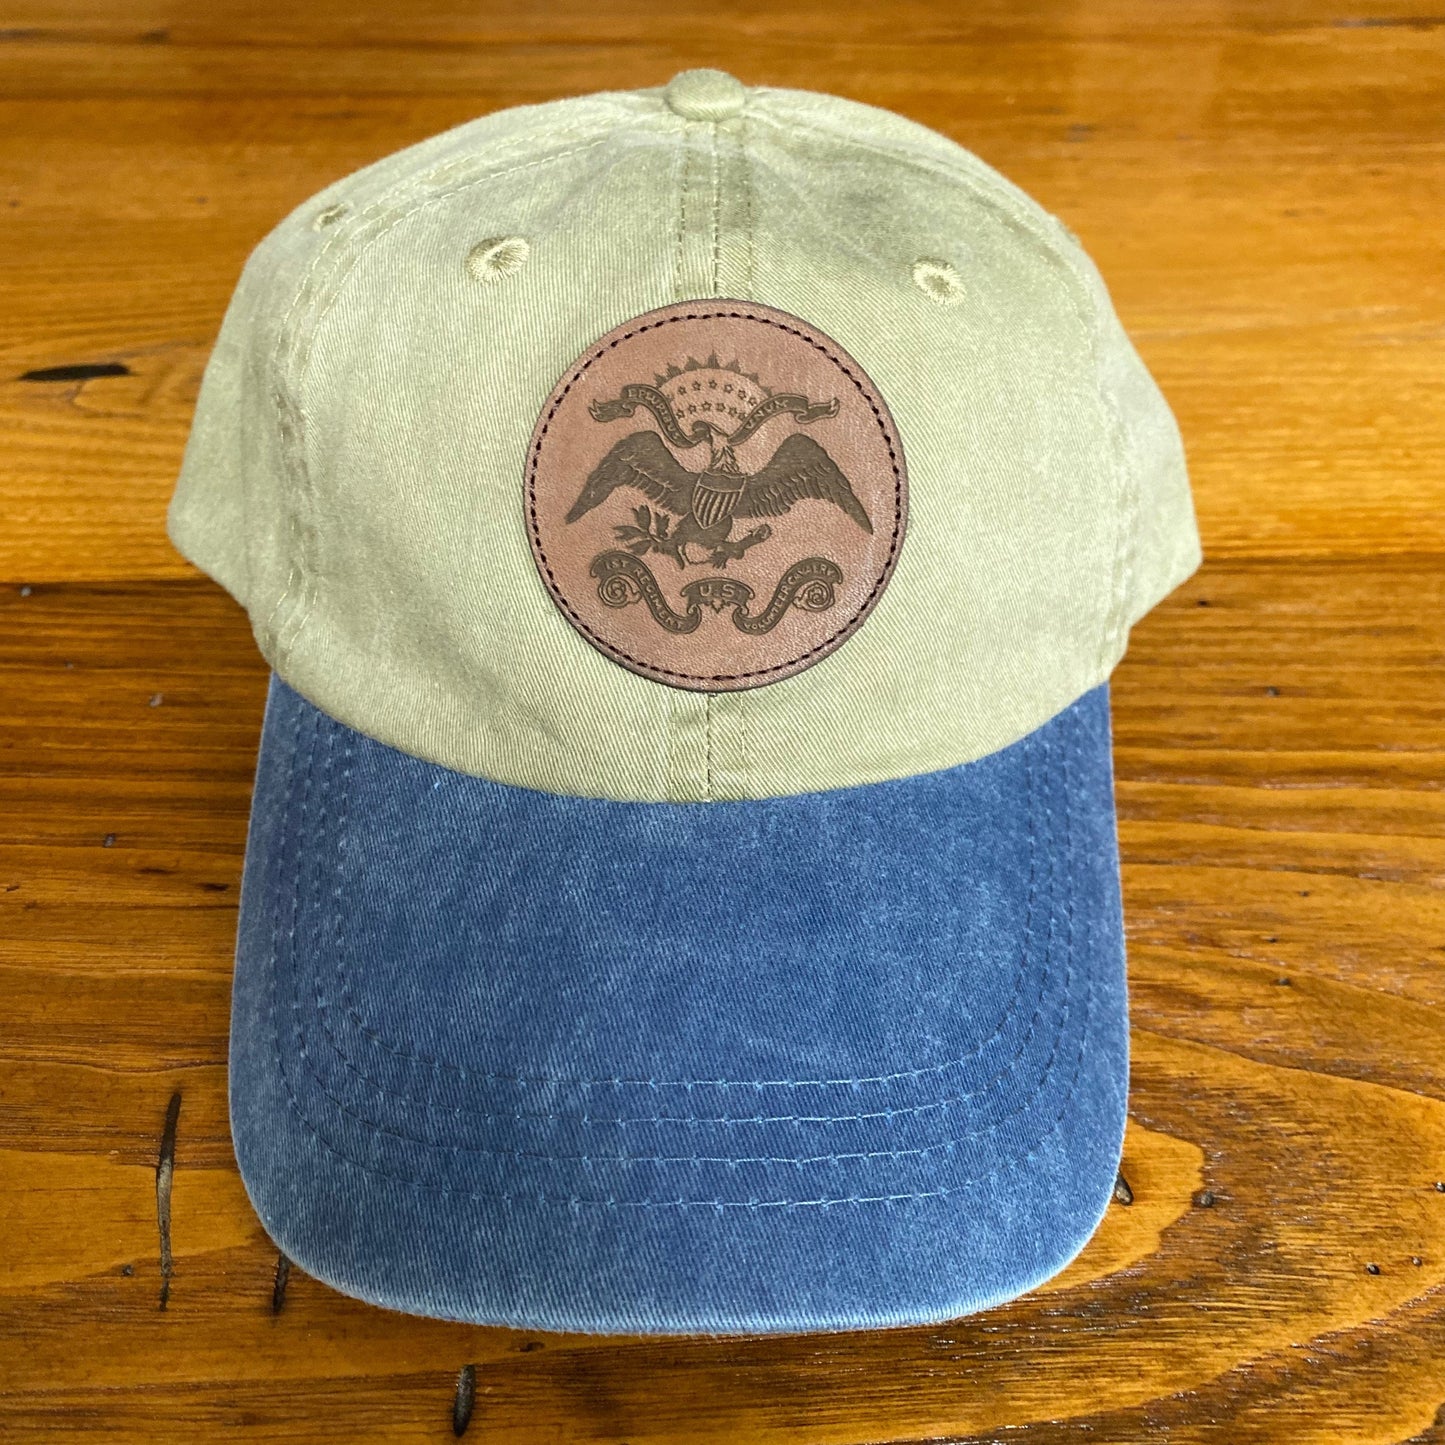 Khaki-Navy Teddy Roosevelt "Rough Riders" Leather patch cap from the History List Store